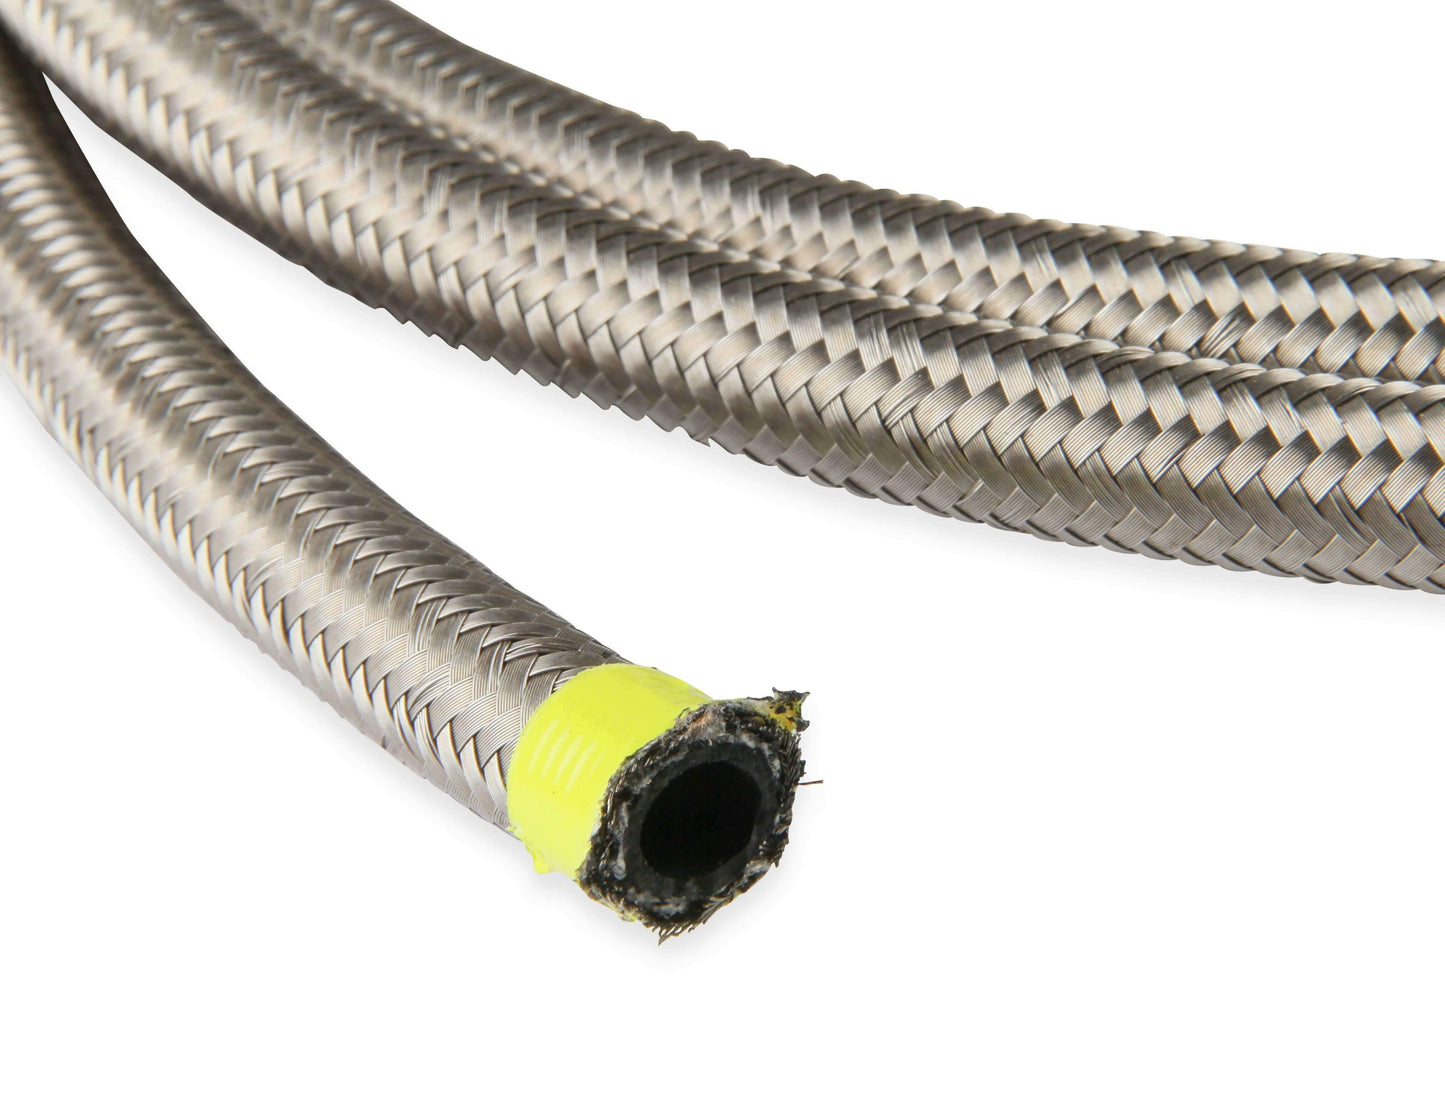 Earls Auto-Flex Hose- Size12 -Sold Per Foot Continuous Length upto 50'-300012ERL